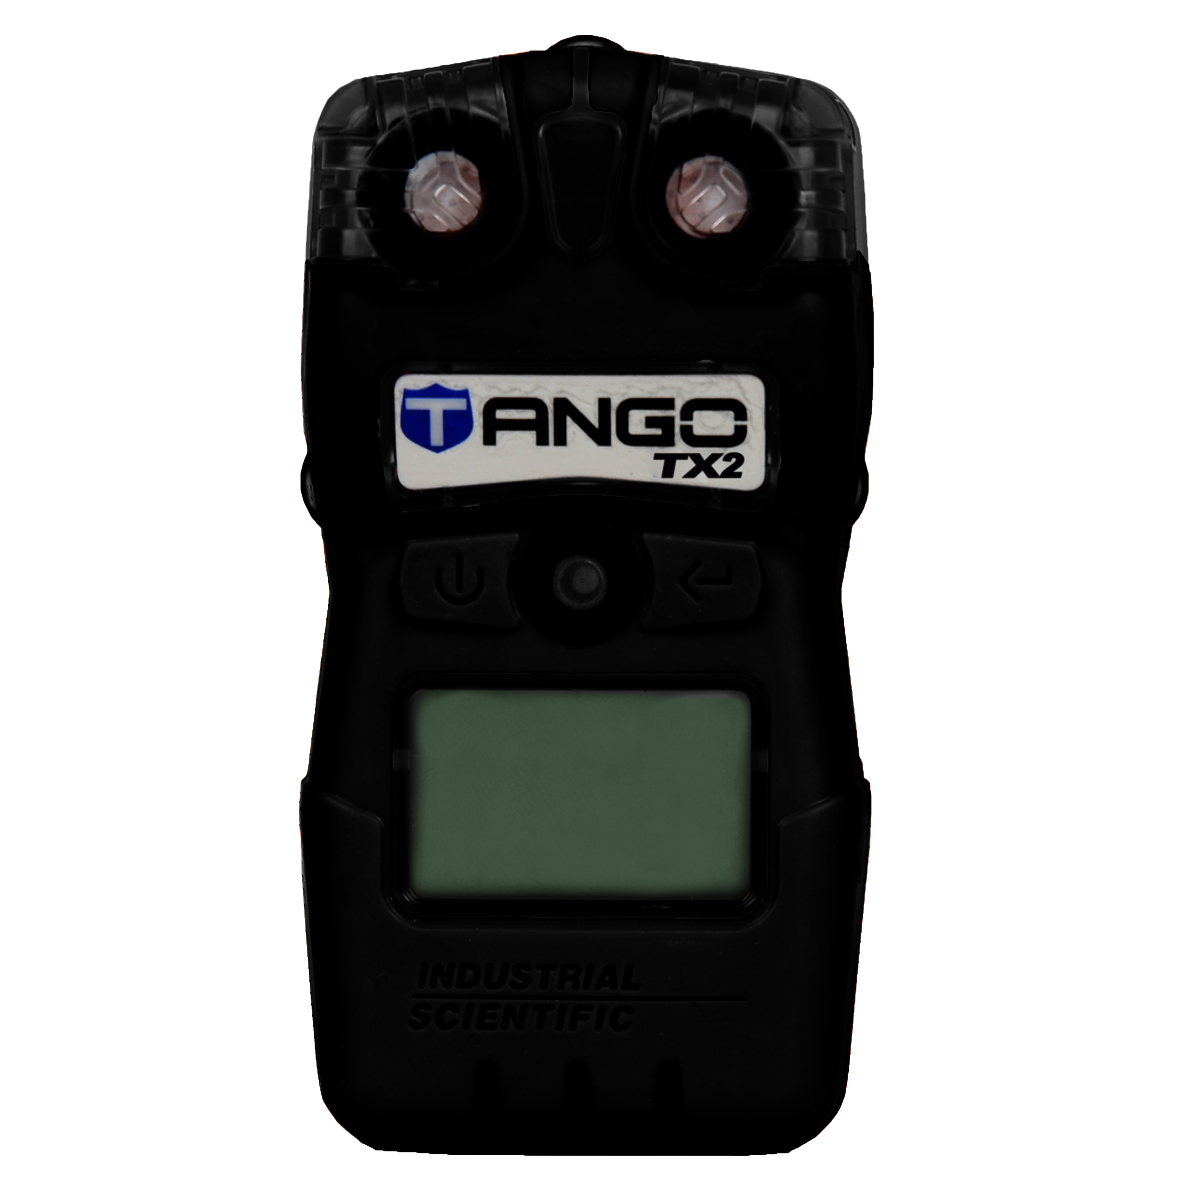 Industrial Scientific Tango TX2 Portable Hydrogen Sulfide And Sulfur Dioxide Gas Monitor-eSafety Supplies, Inc